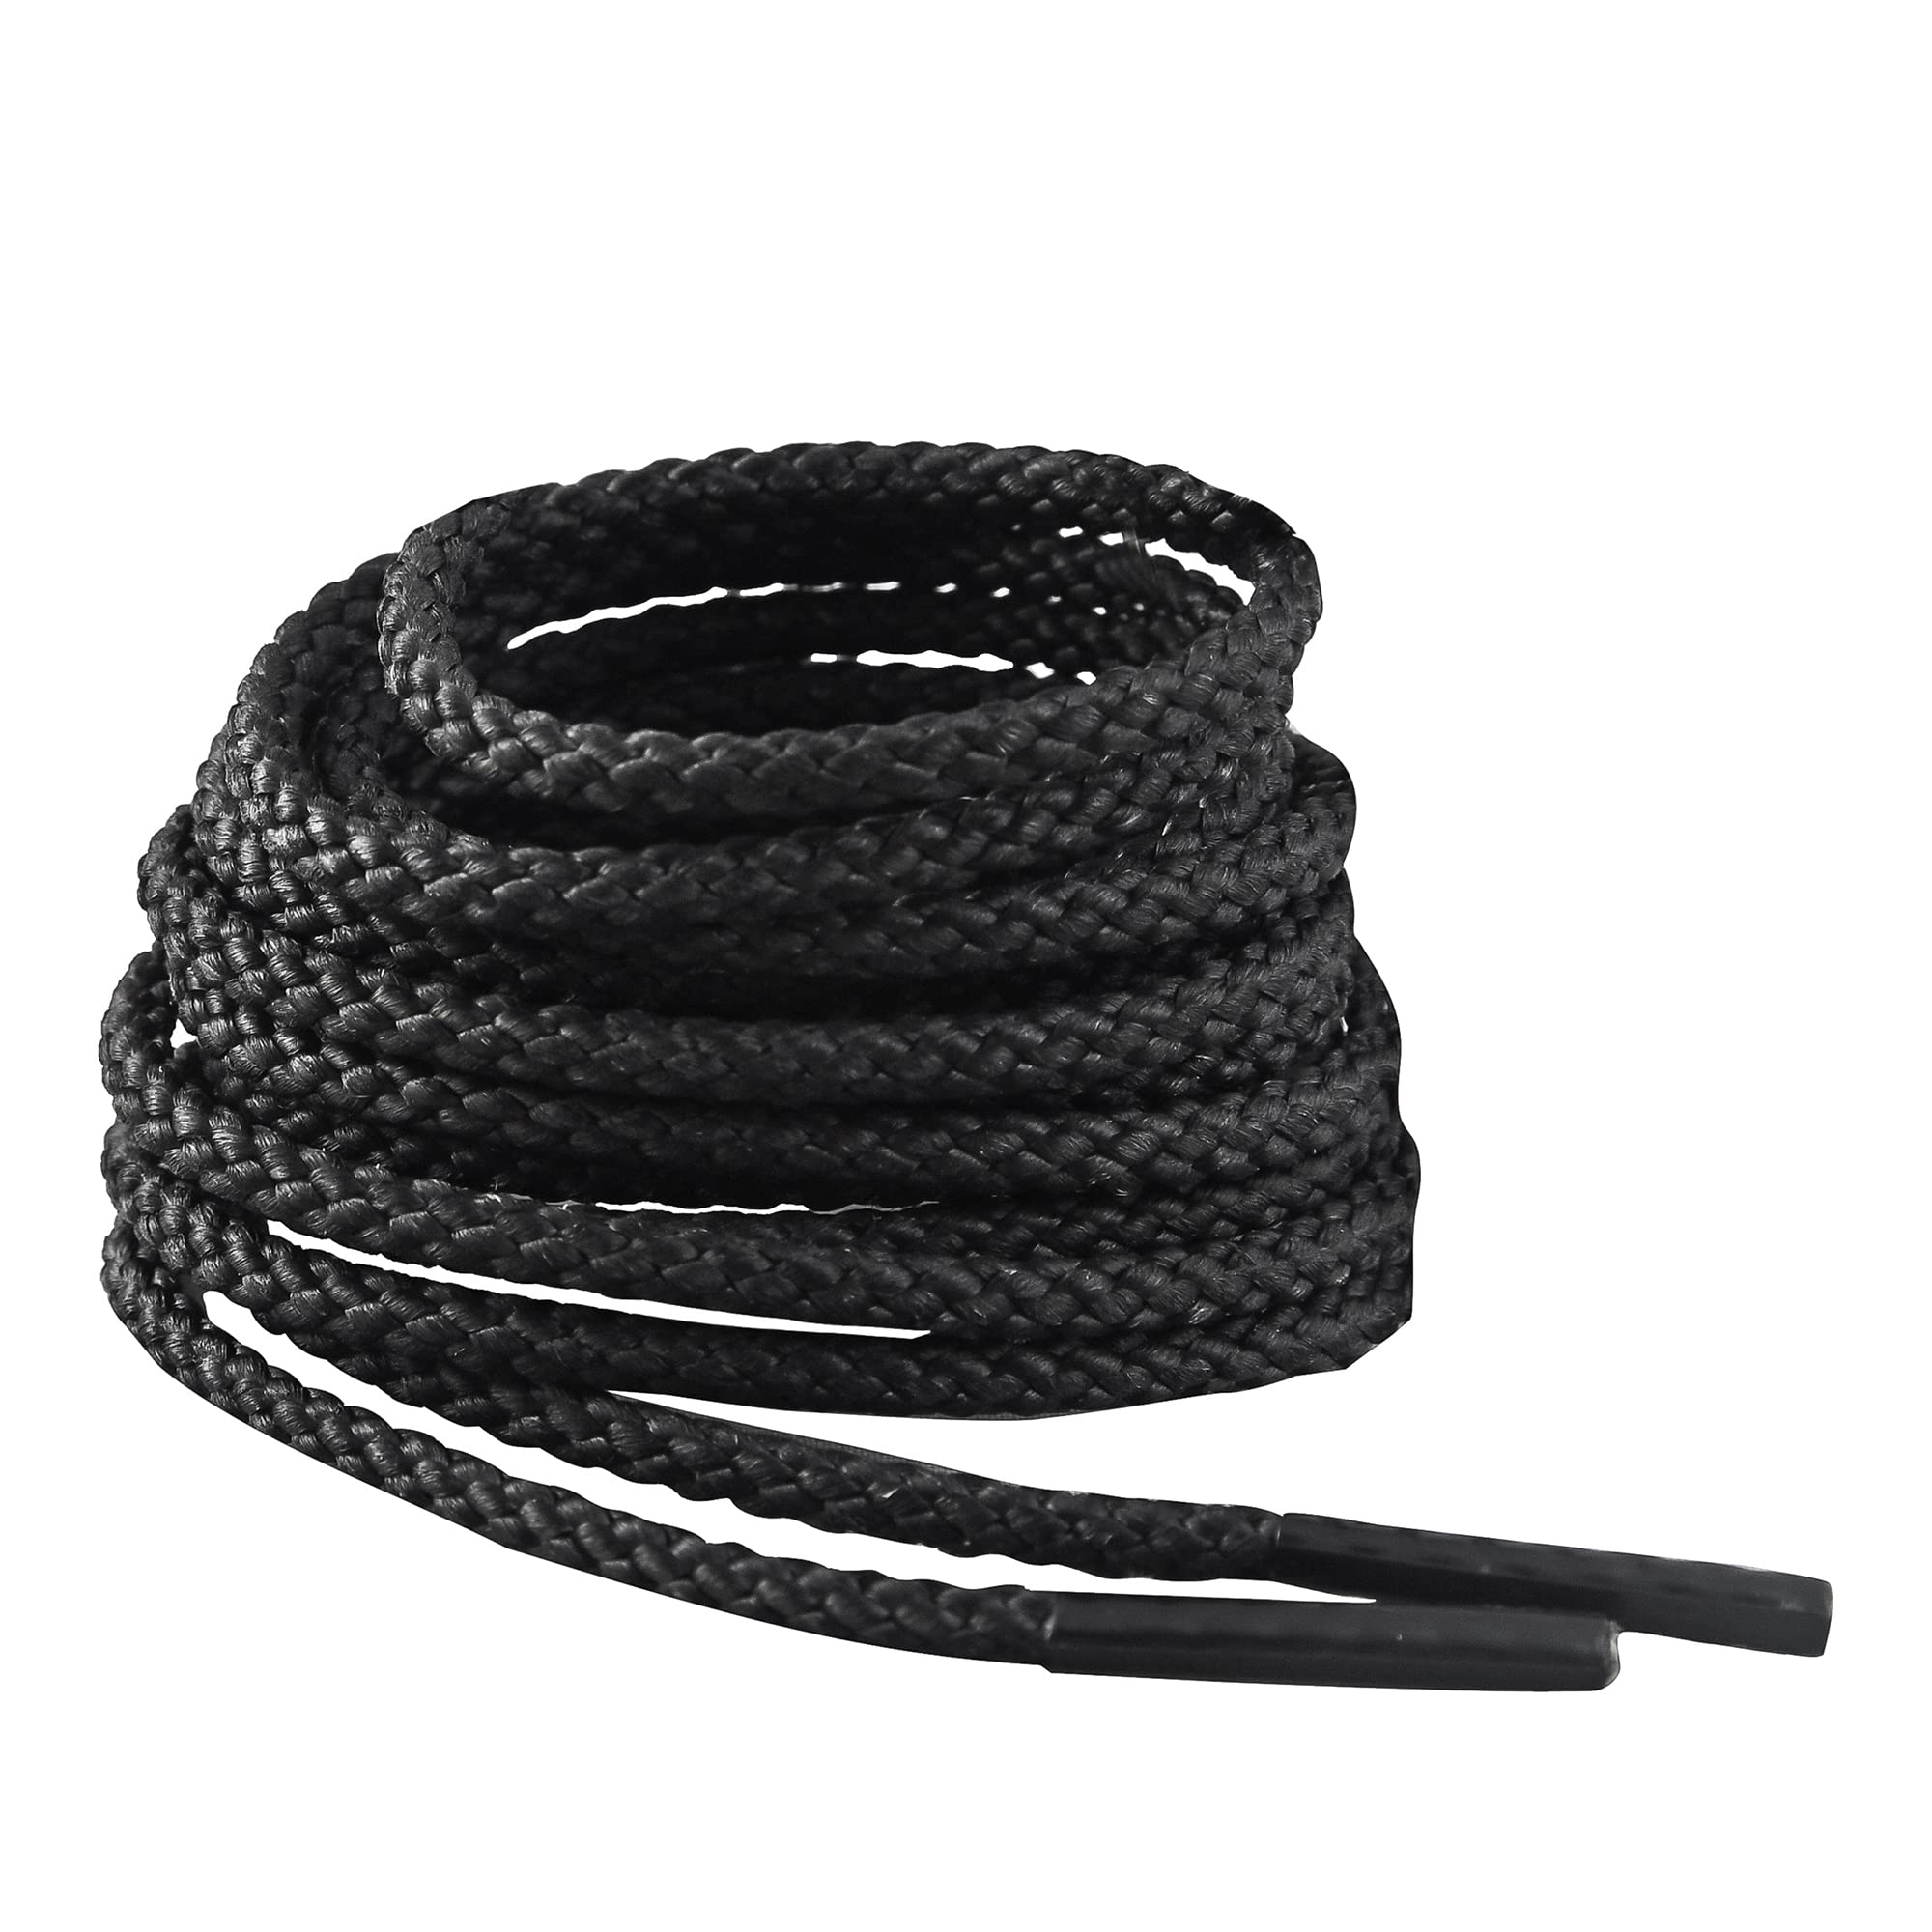 Kg's XTREME Heavy Duty Boot Laces made from 100% Kevlar and Nylon,  Virtually Indestructible Boot Laces